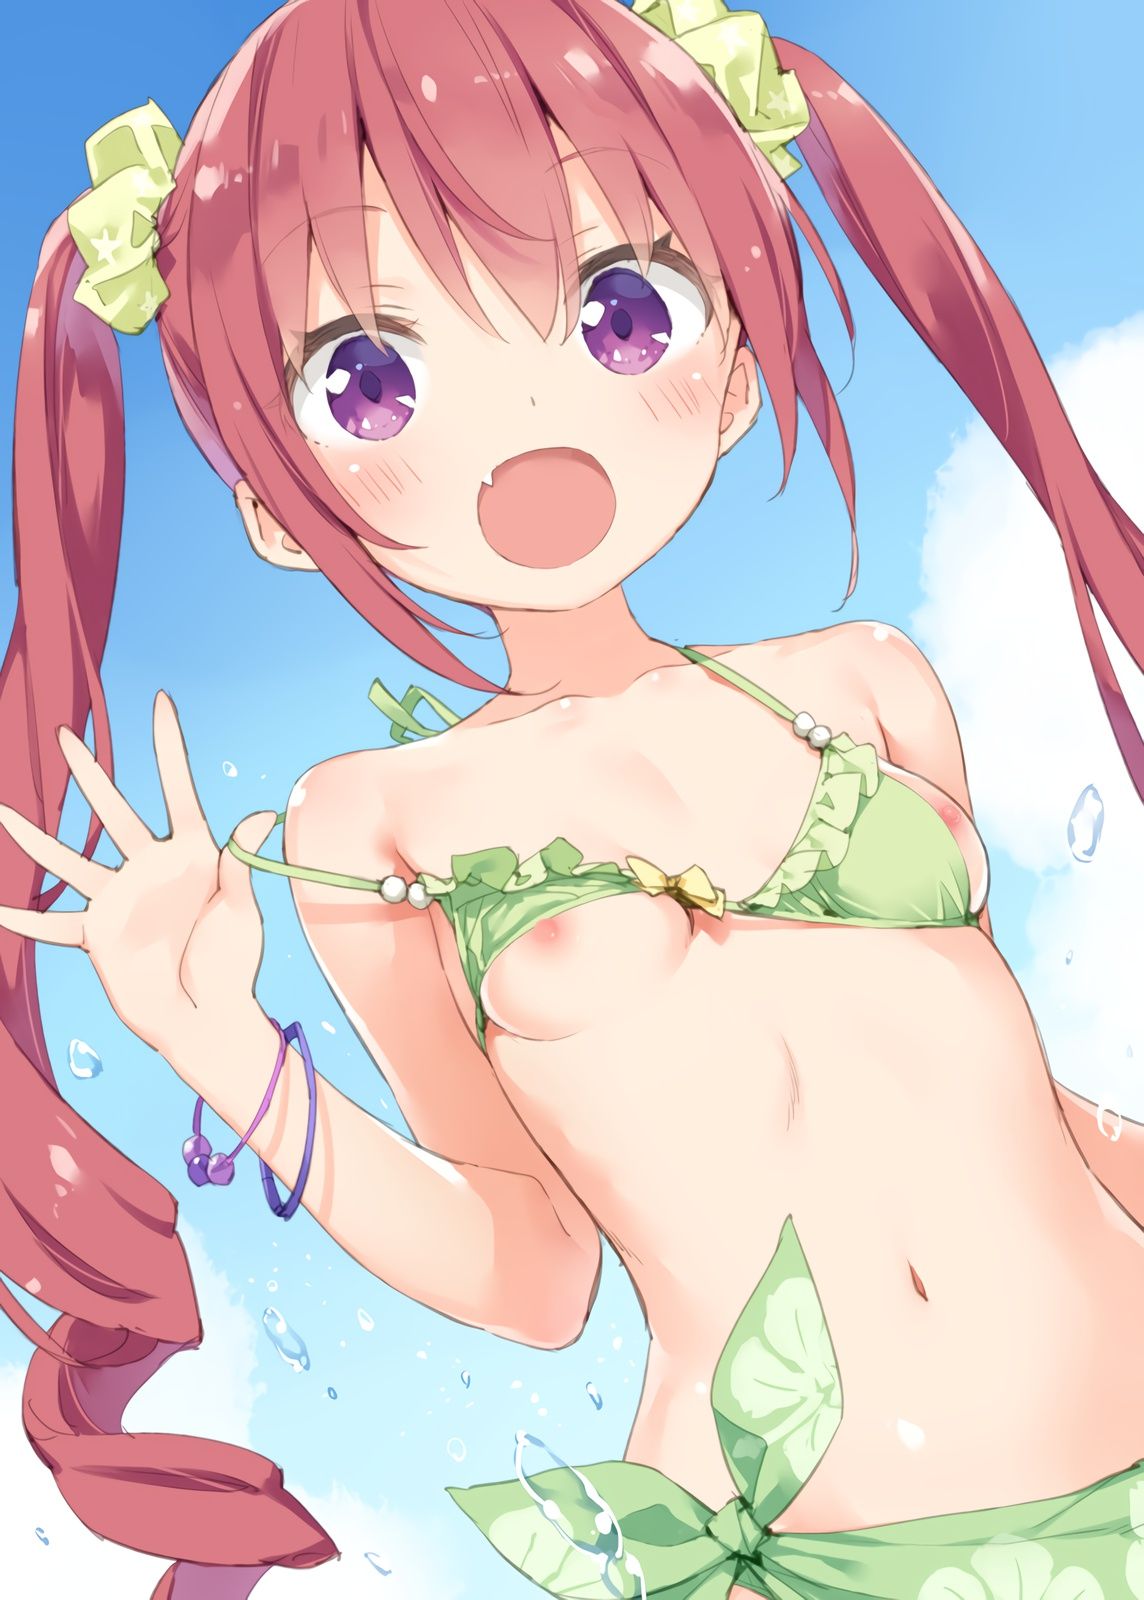 This is what the small life does?! Erotic erotic image collection of cute Loli girl! Part 39 2